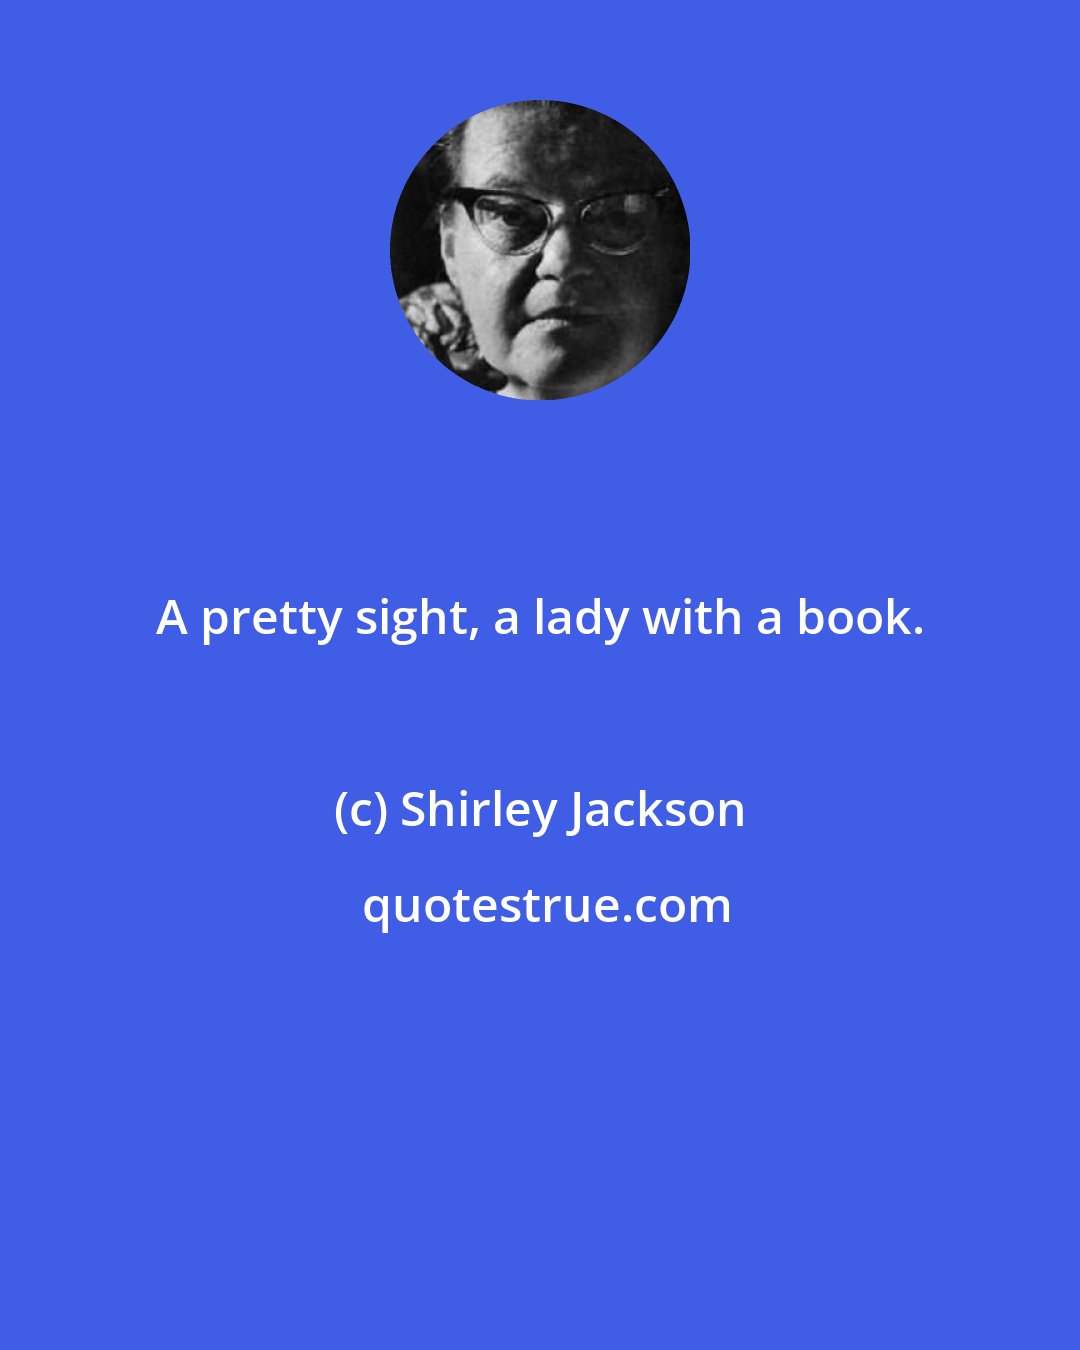 Shirley Jackson: A pretty sight, a lady with a book.